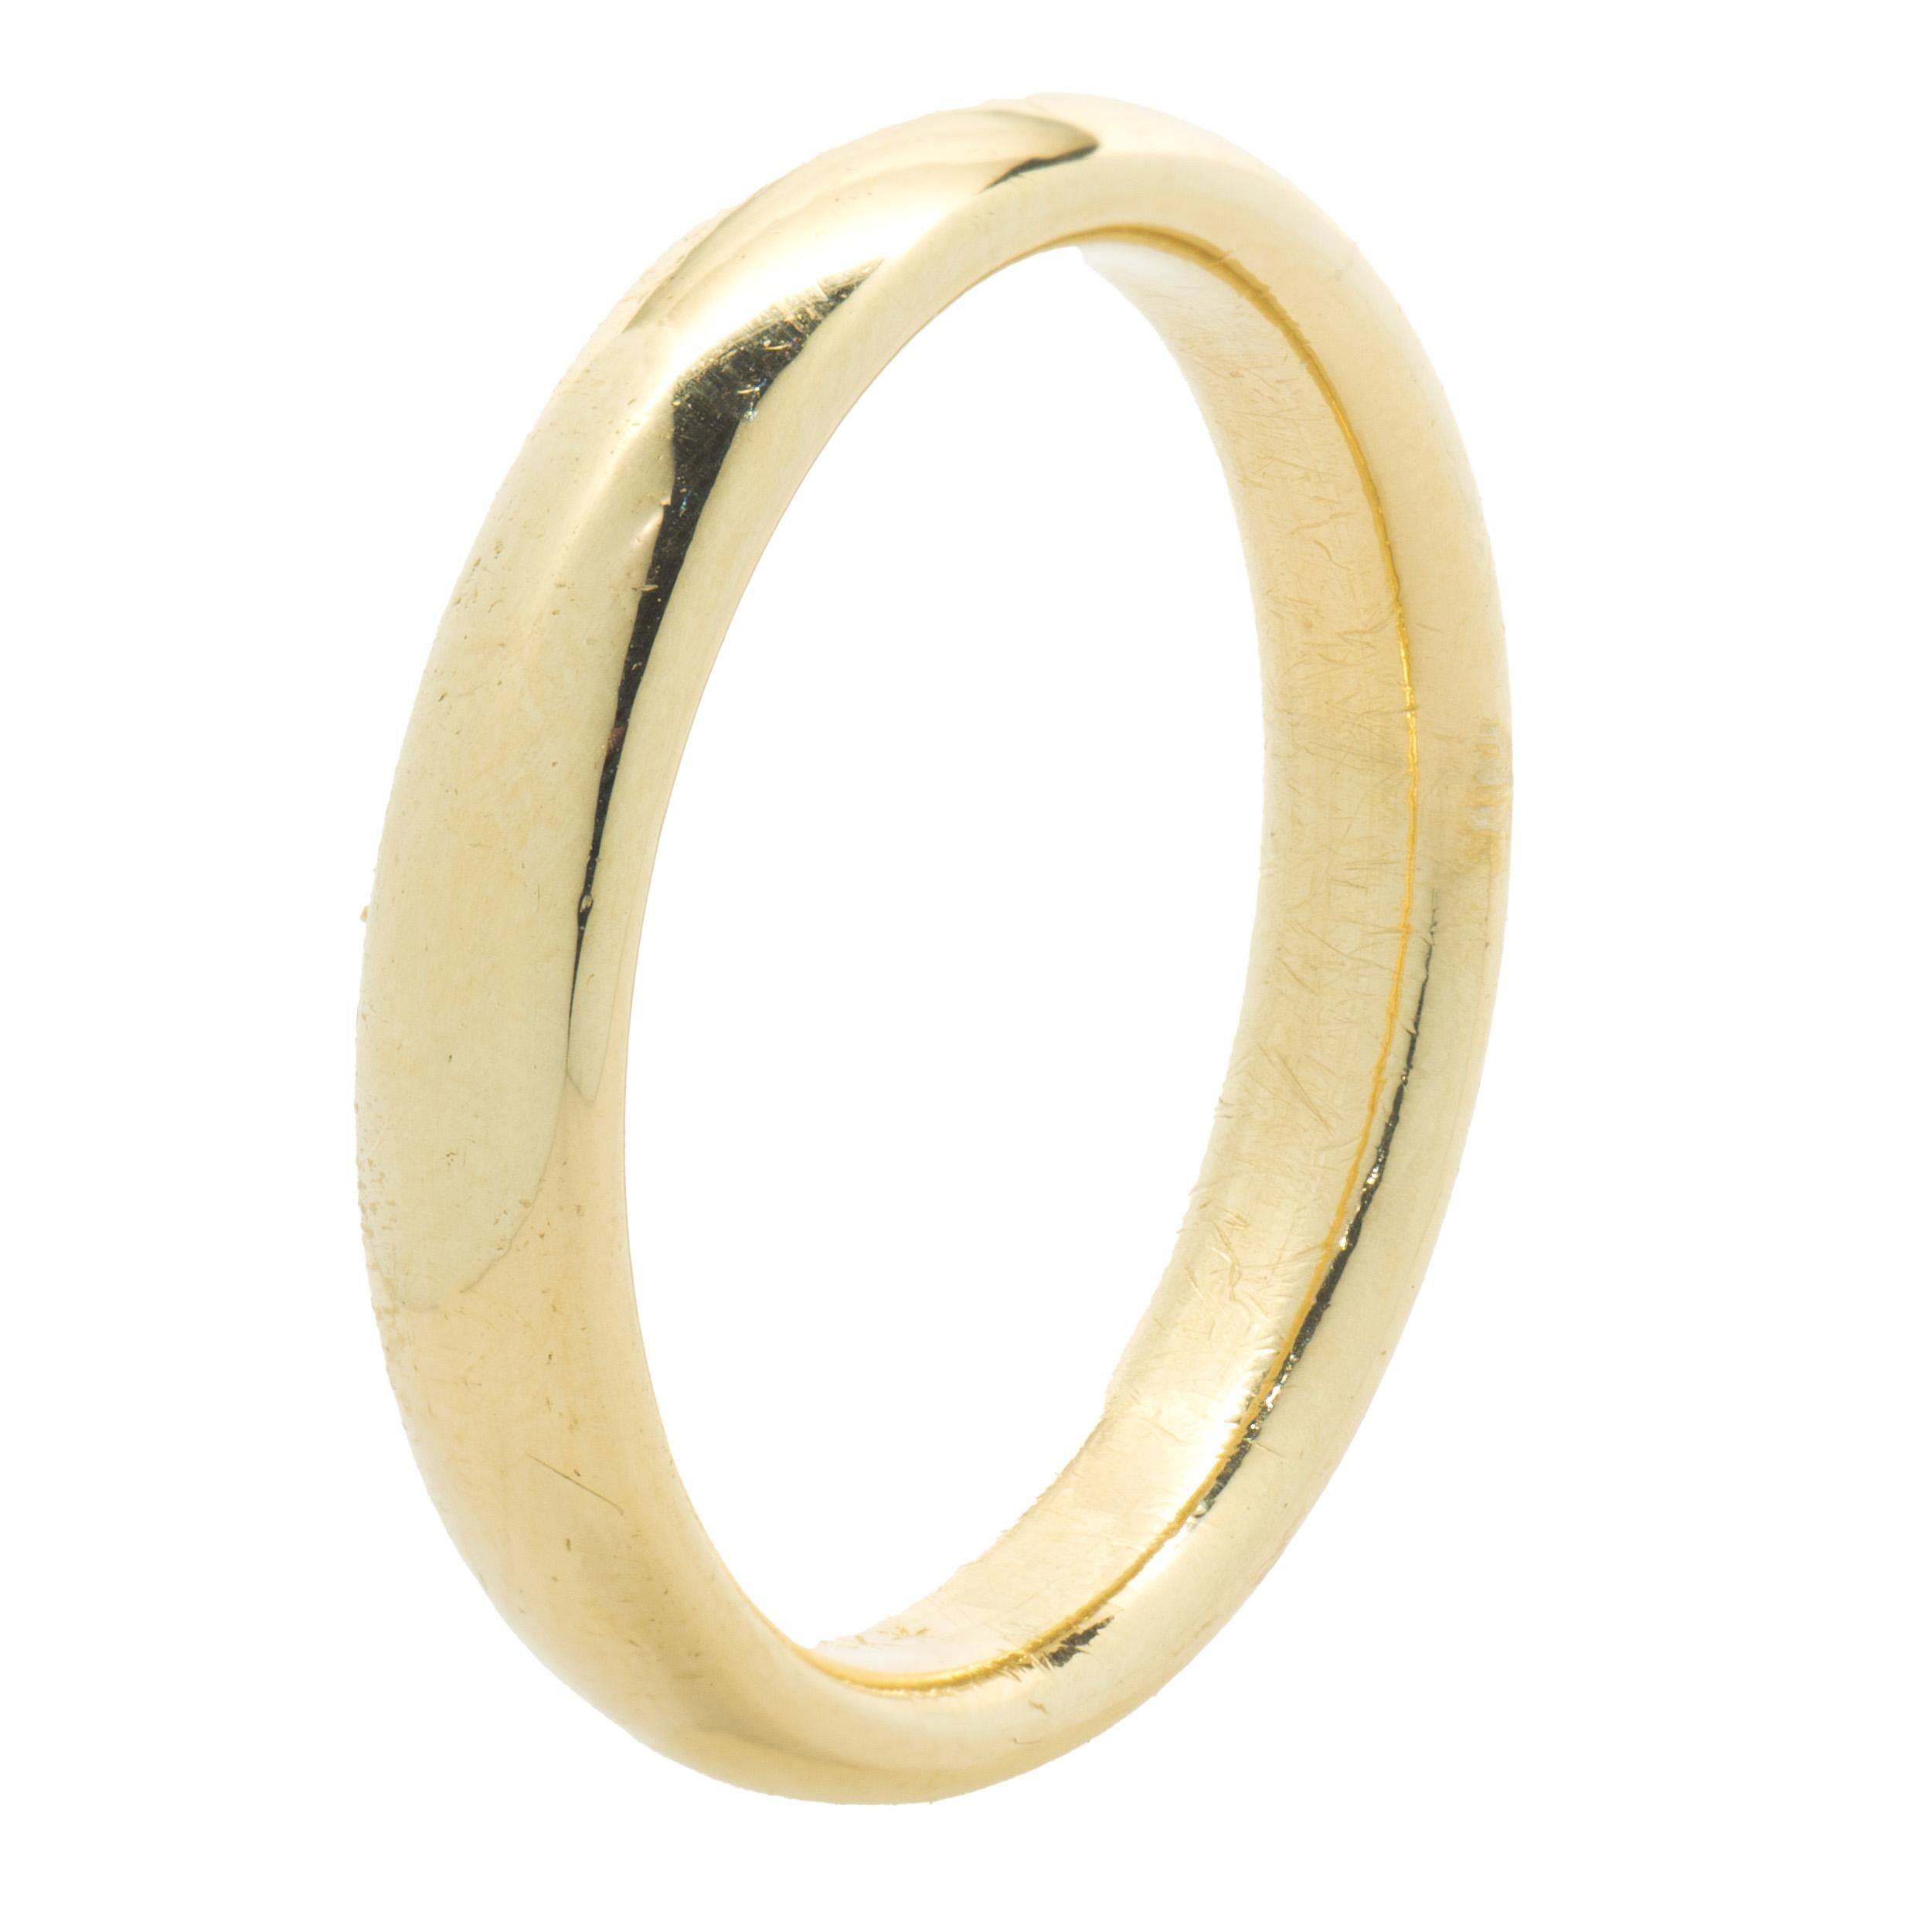 Designer: custom
Material: 14K yellow gold
Dimensions: the ring measures 4mm wide
Weight:  6.46 grams
Ring Size: 9.5 (Please allow up to 2 additional business days for sizing requests) 